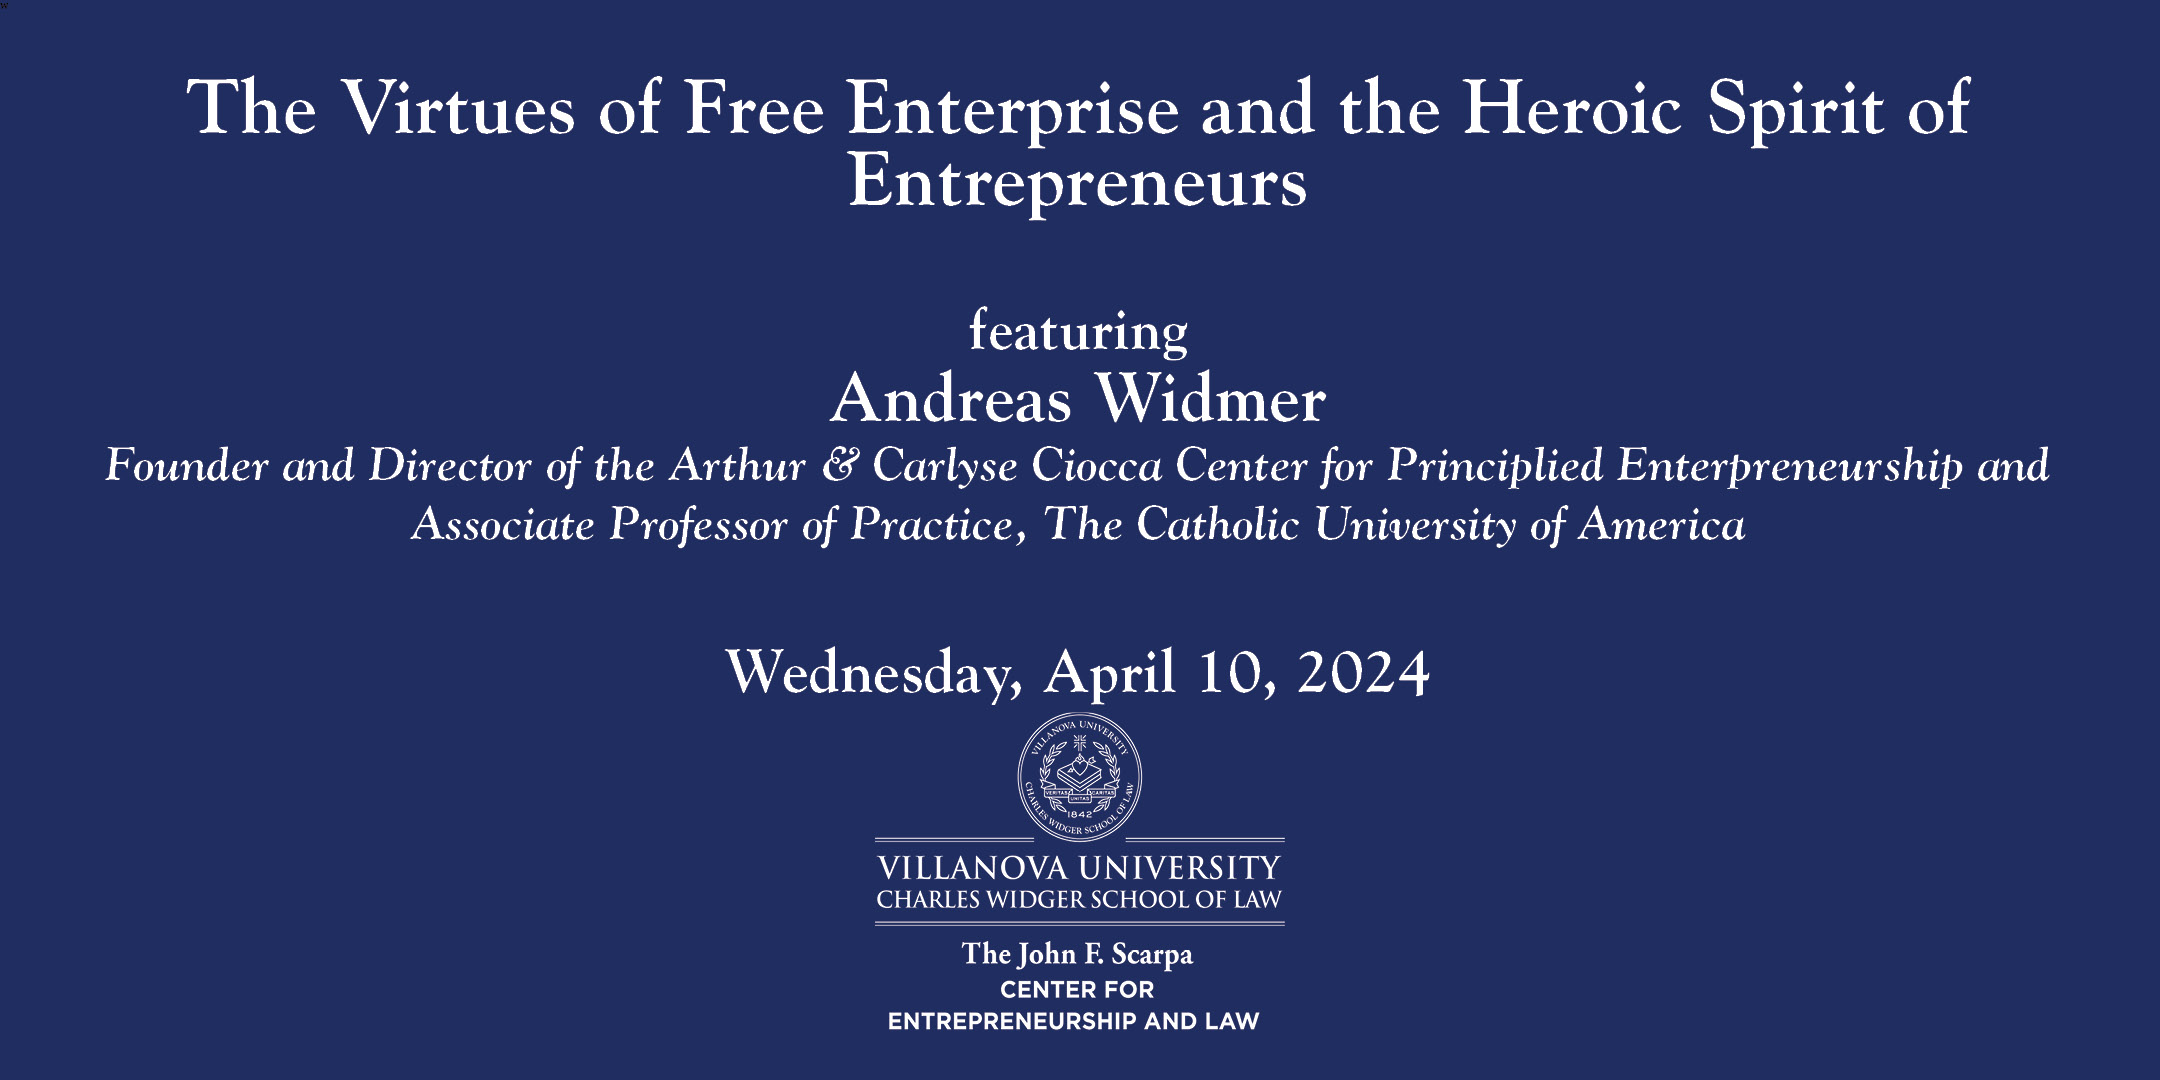 The Virtues of Free Enterprise and the Heroic Spirit of Entrepreneurs, a conversation with Professors Andreas Widmer and MarySheila McDonald